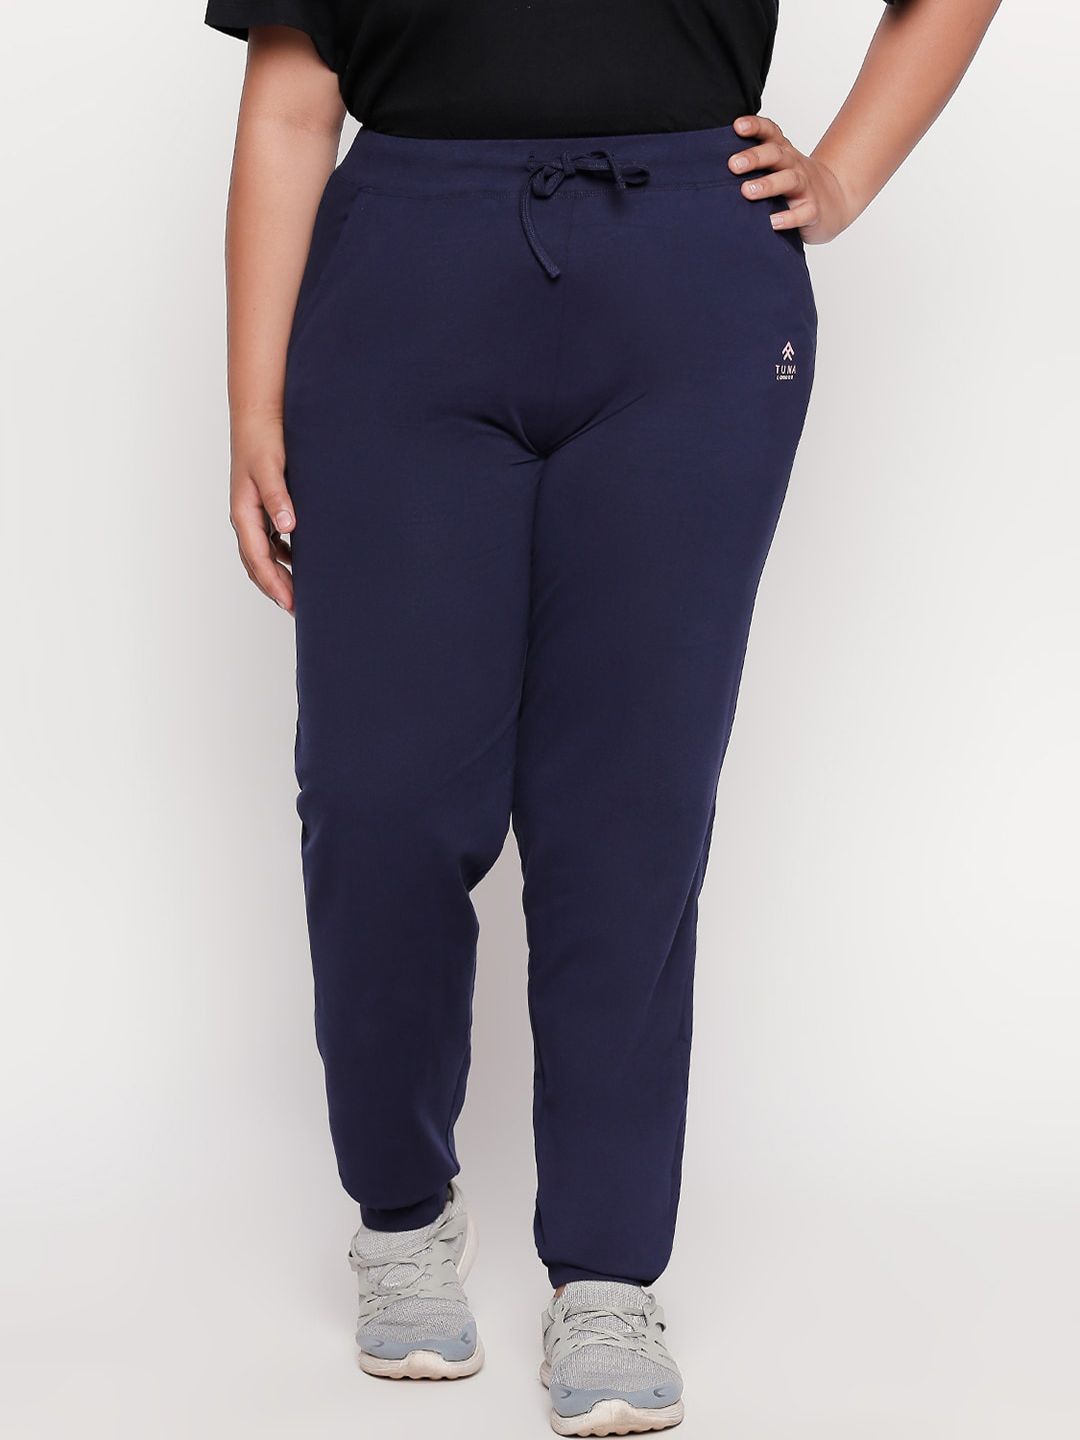 Tuna London Women Navy Blue Solid Slim Fit Joggers Price in India